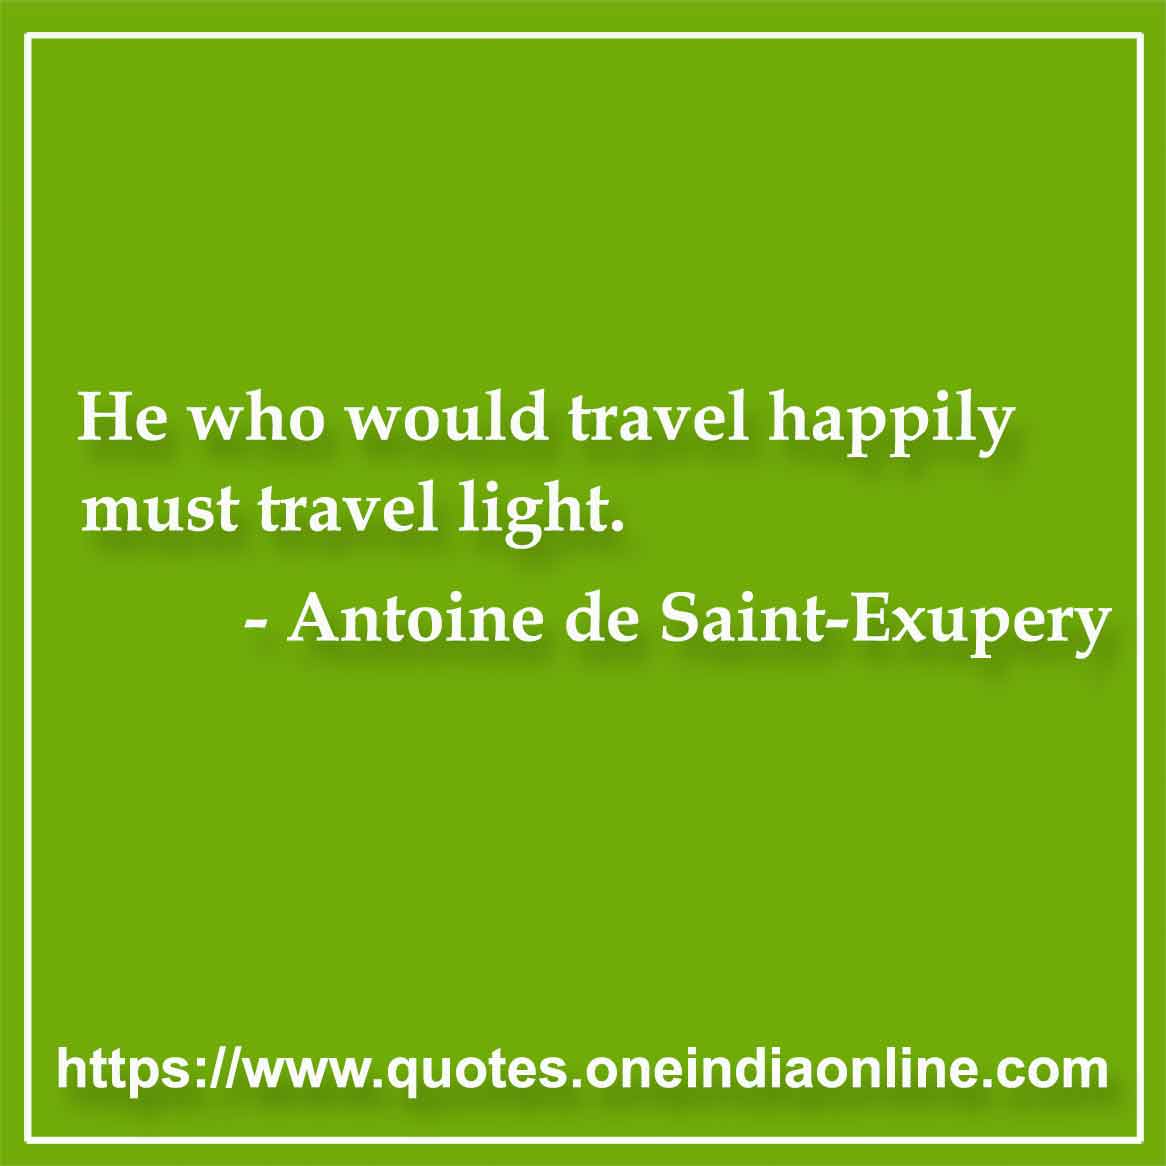 He who would travel happily must travel light.

-  by Antoine de Saint-Exupery